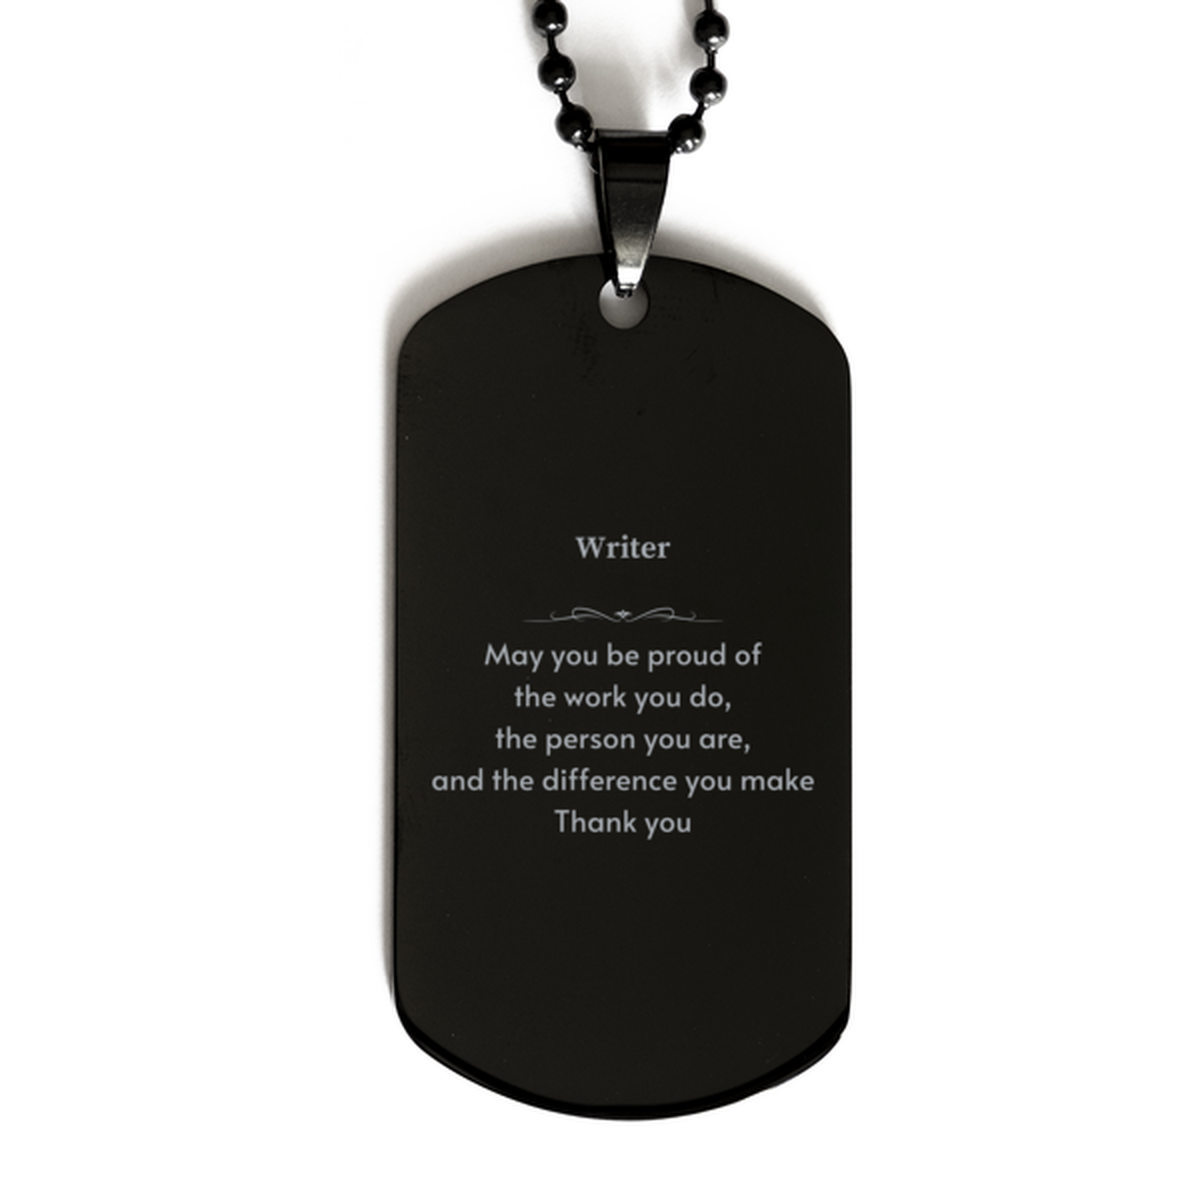 Heartwarming Black Dog Tag Retirement Coworkers Gifts for Writer, Writer May You be proud of the work you do, the person you are Gifts for Boss Men Women Friends